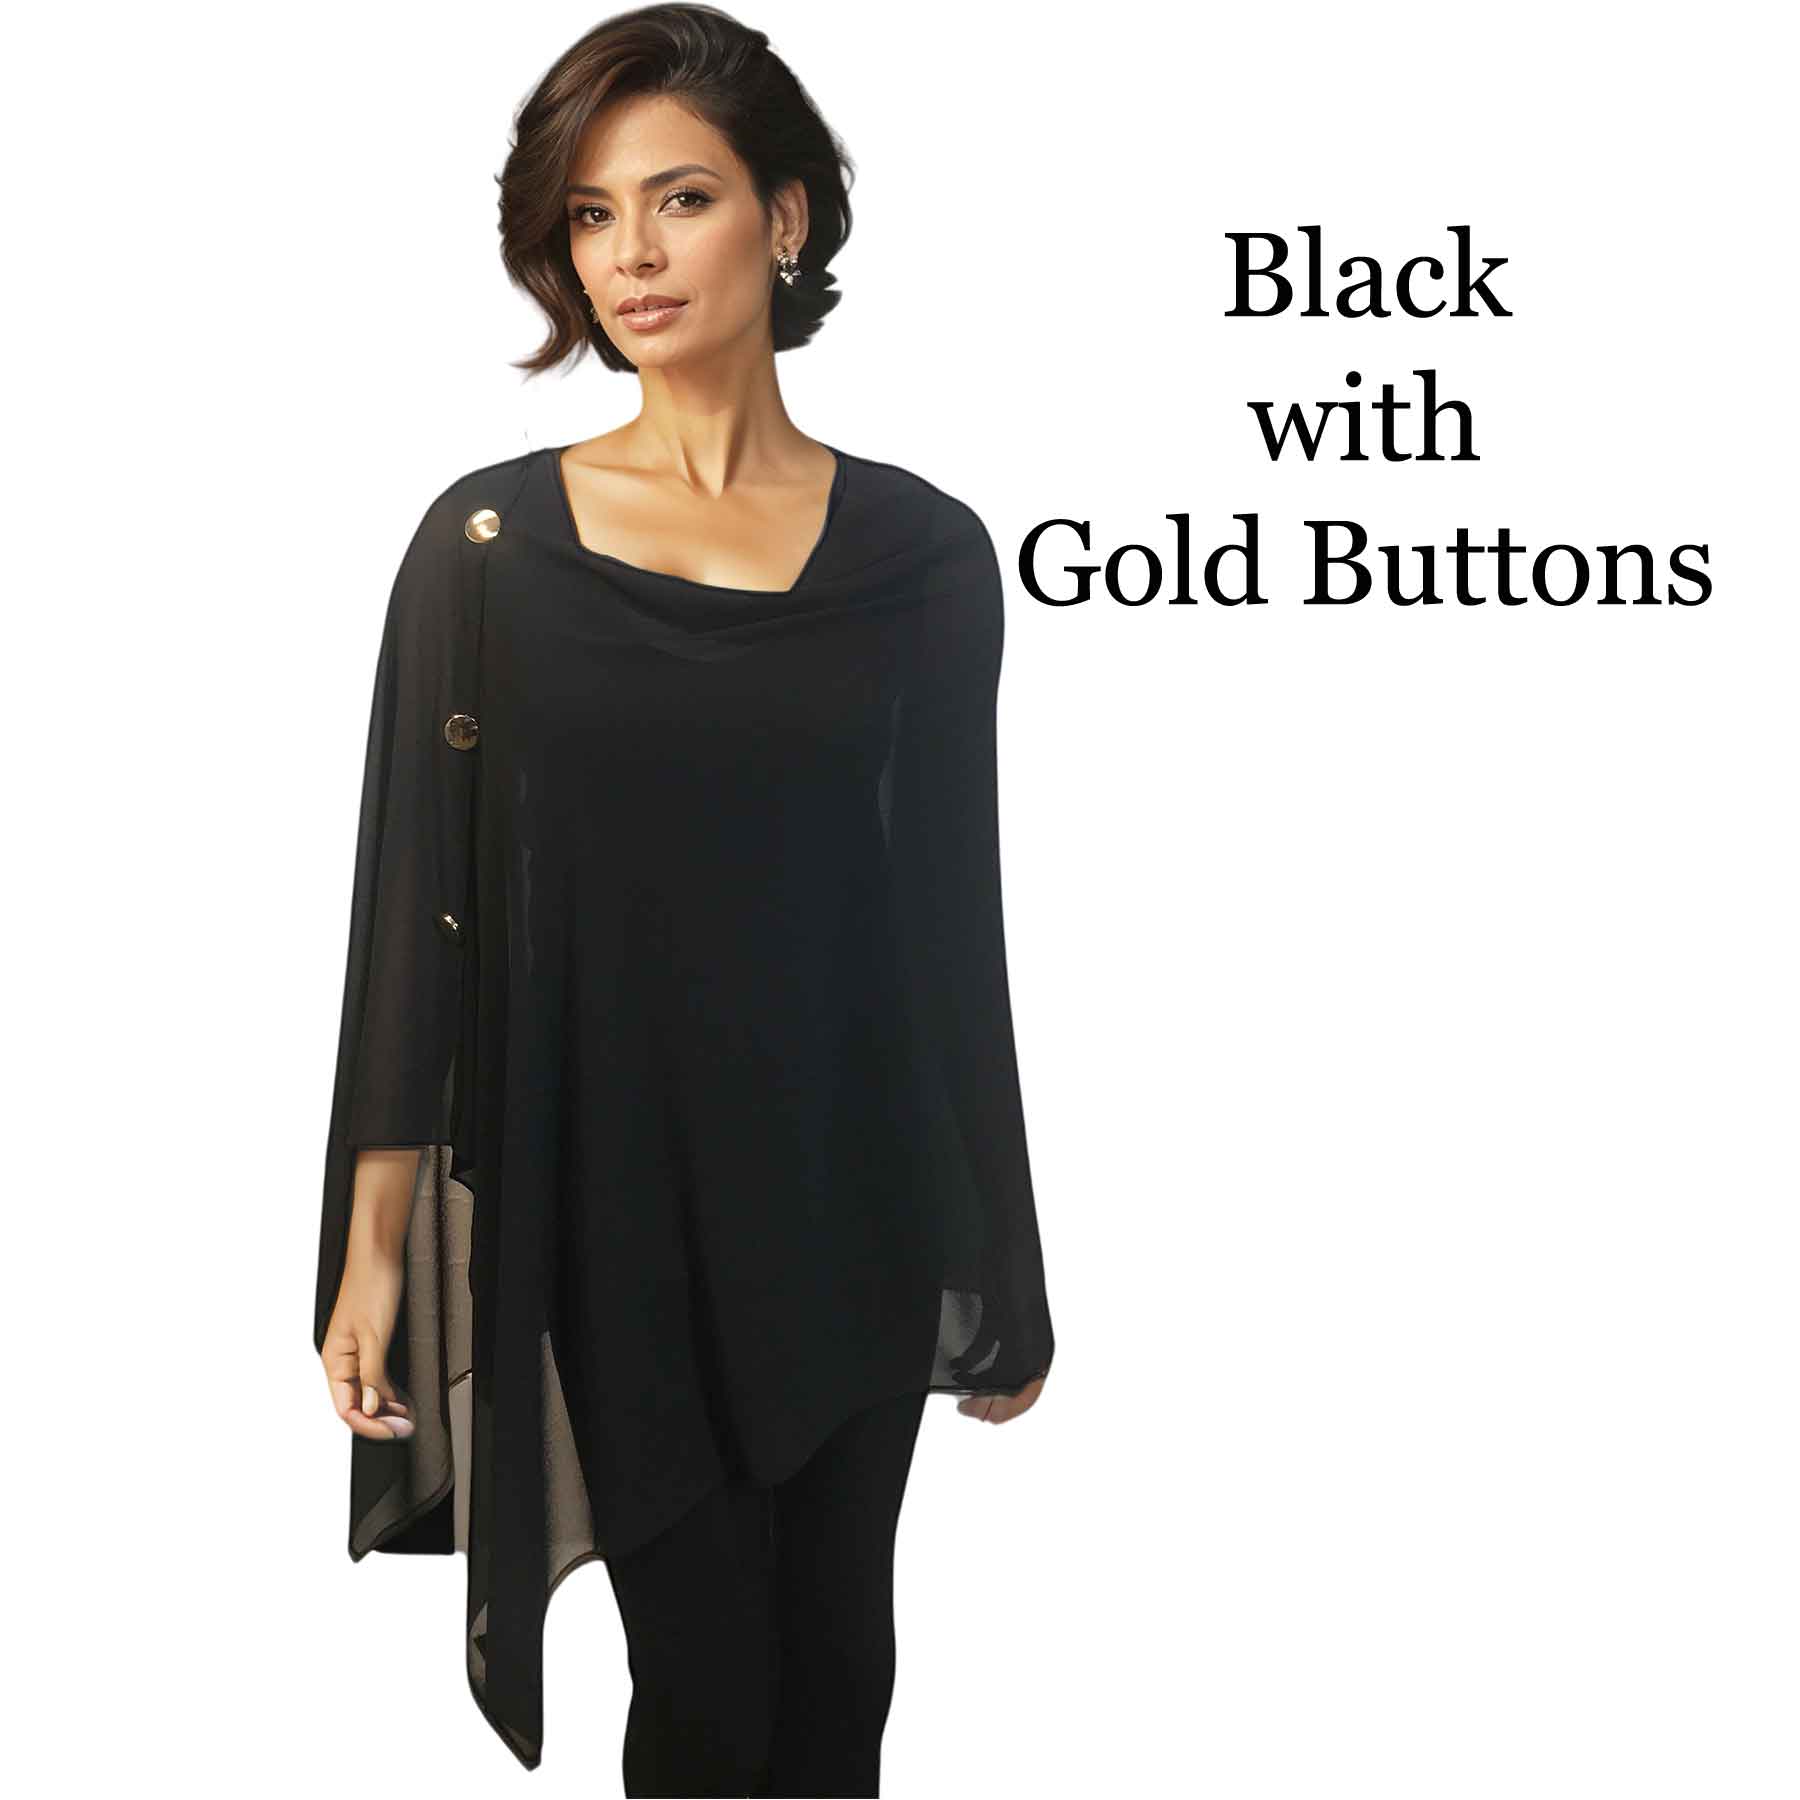 017G - Black w/Gold Buttons<br>
Georgette Button Shawl

